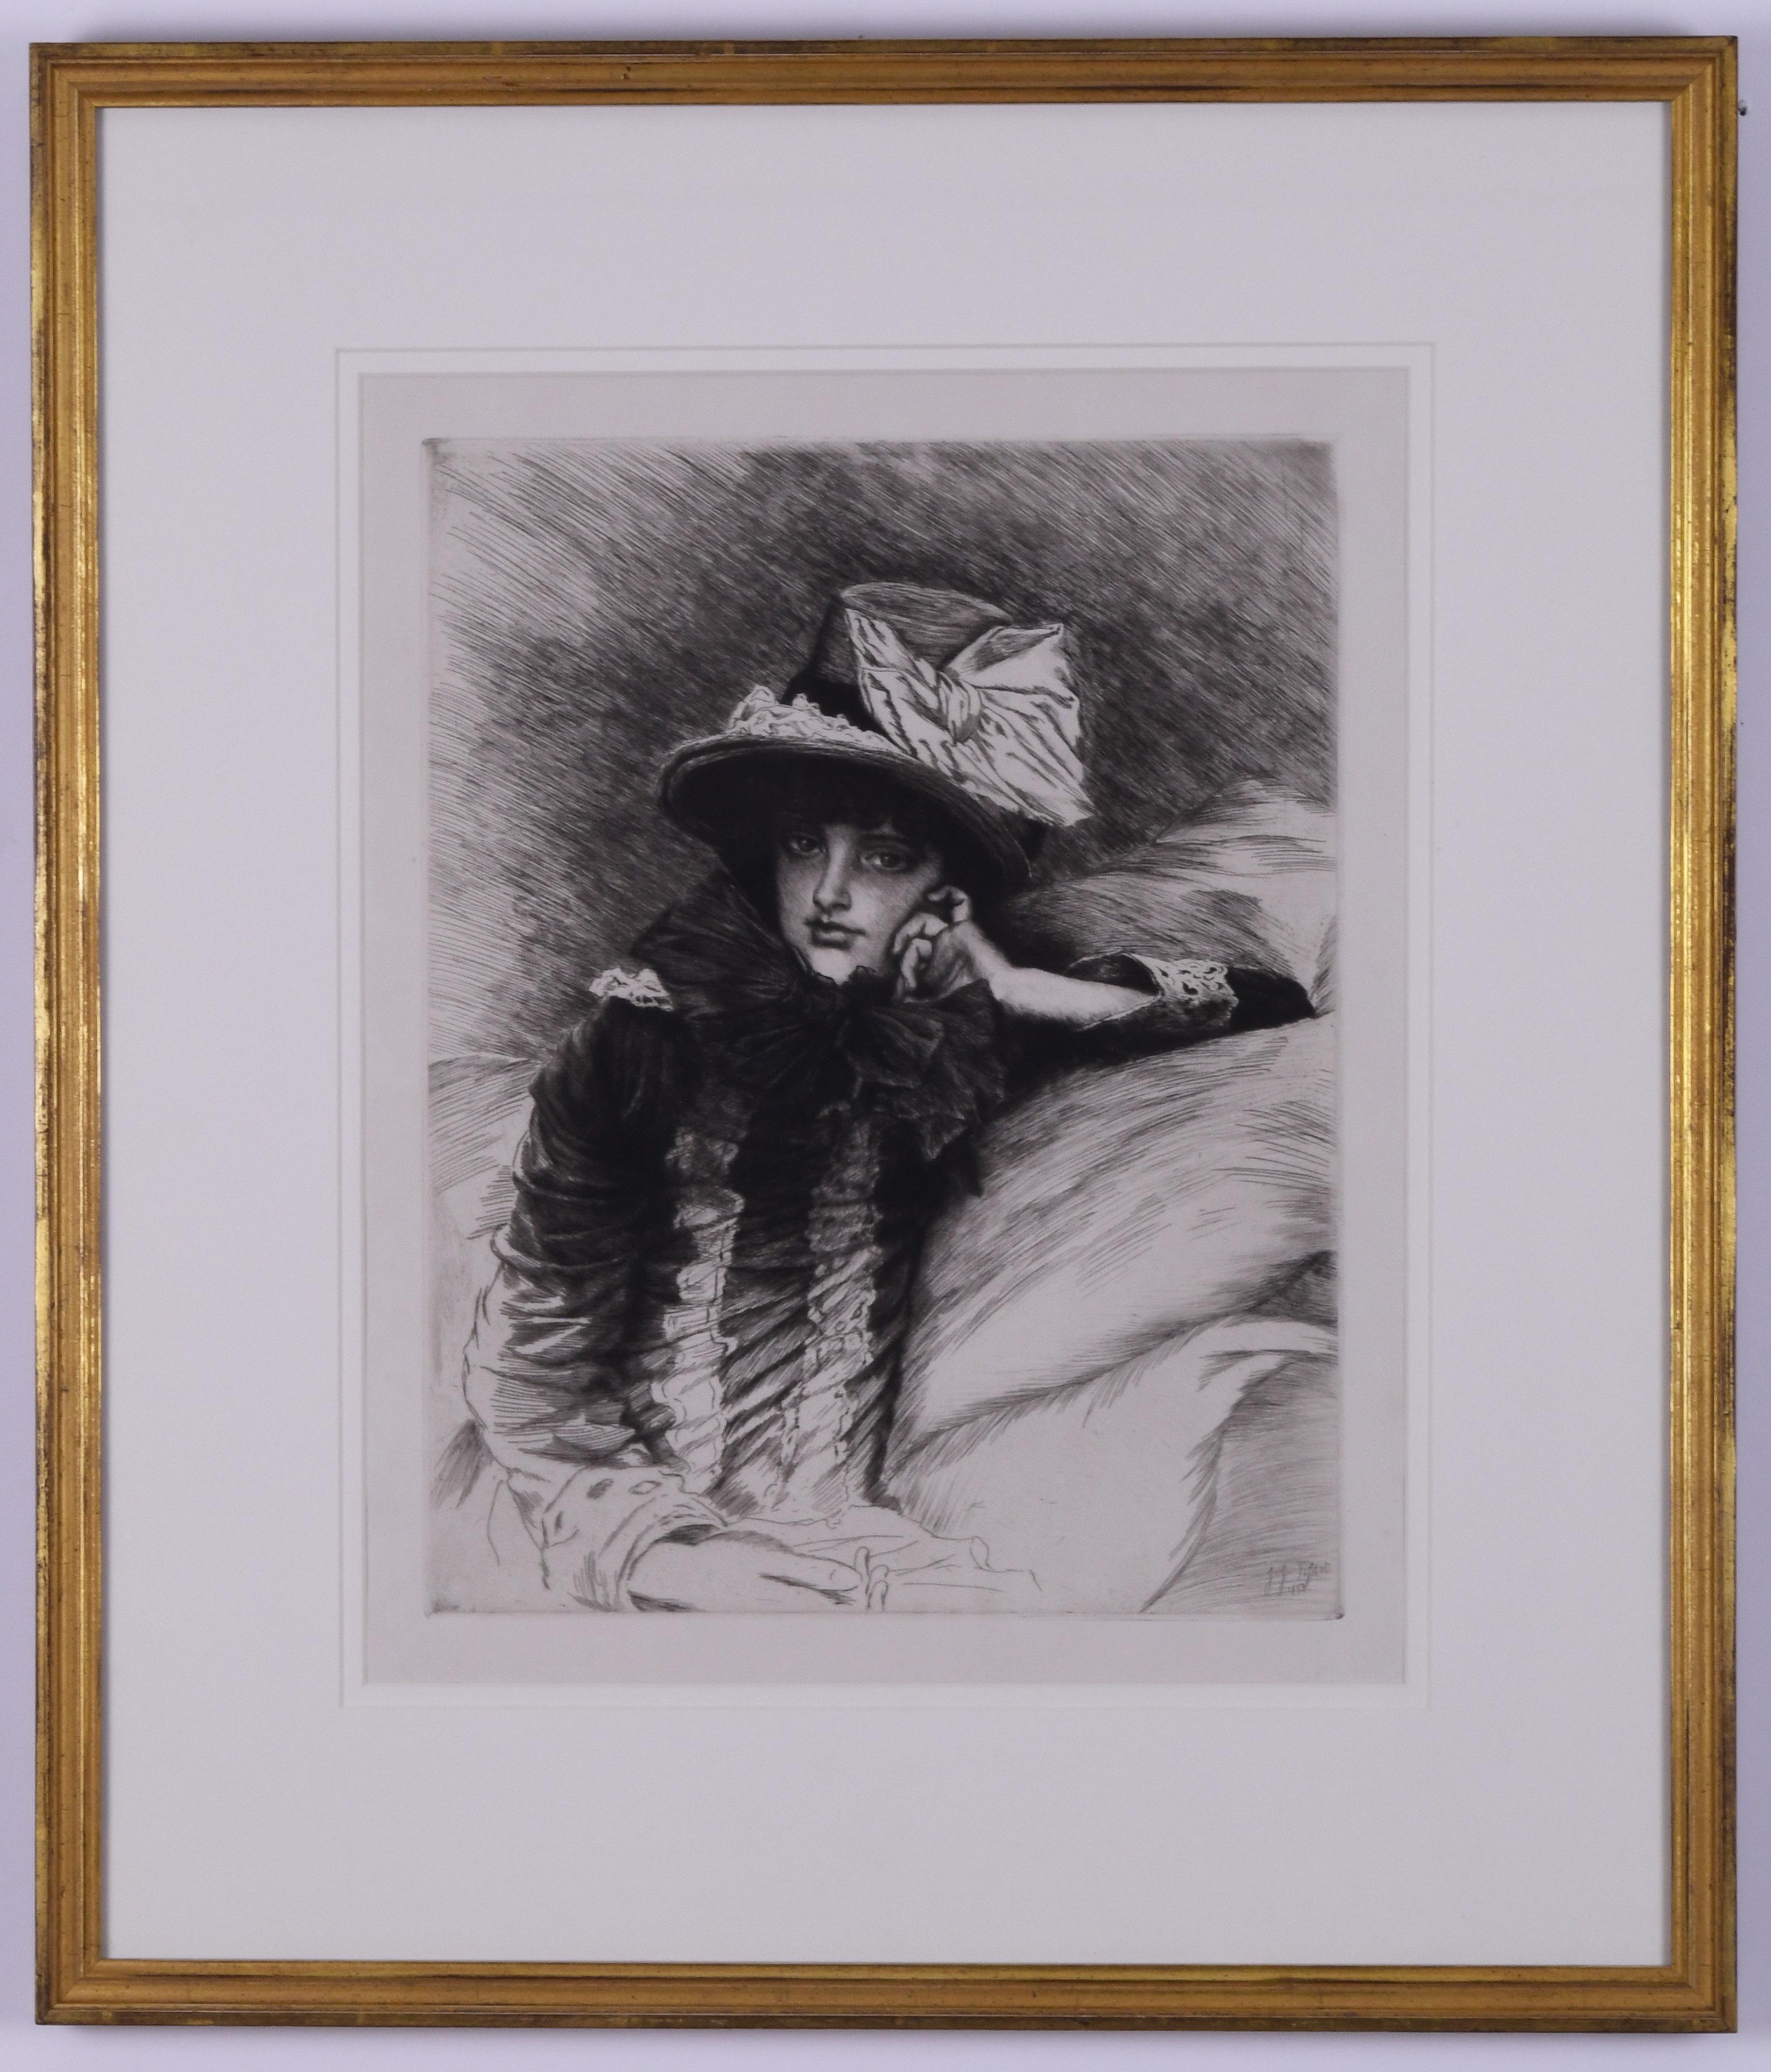 Berthe
Etching with drypoint, 1883
Signed in the plate (see photo)
This etching was inspired by an 1882/3 pastel which the artist included in his ambitious 